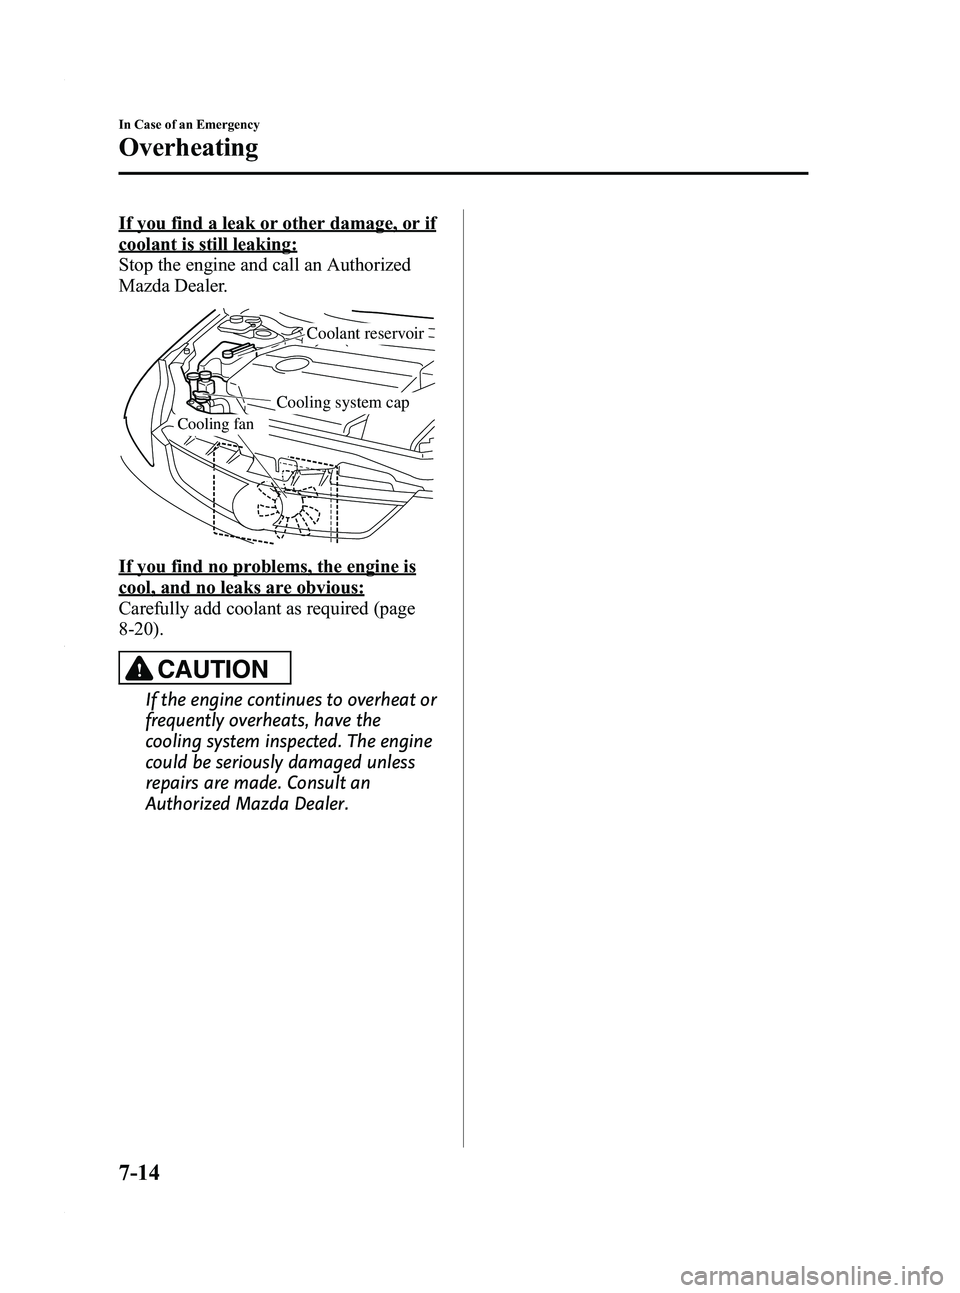 MAZDA MODEL 5 2010  Owners Manual Black plate (260,1)
If you find a leak or other damage, or if
coolant is still leaking:
Stop the engine and call an Authorized
Mazda Dealer.
Cooling fan
Coolant reservoir
Cooling system cap
If you fin